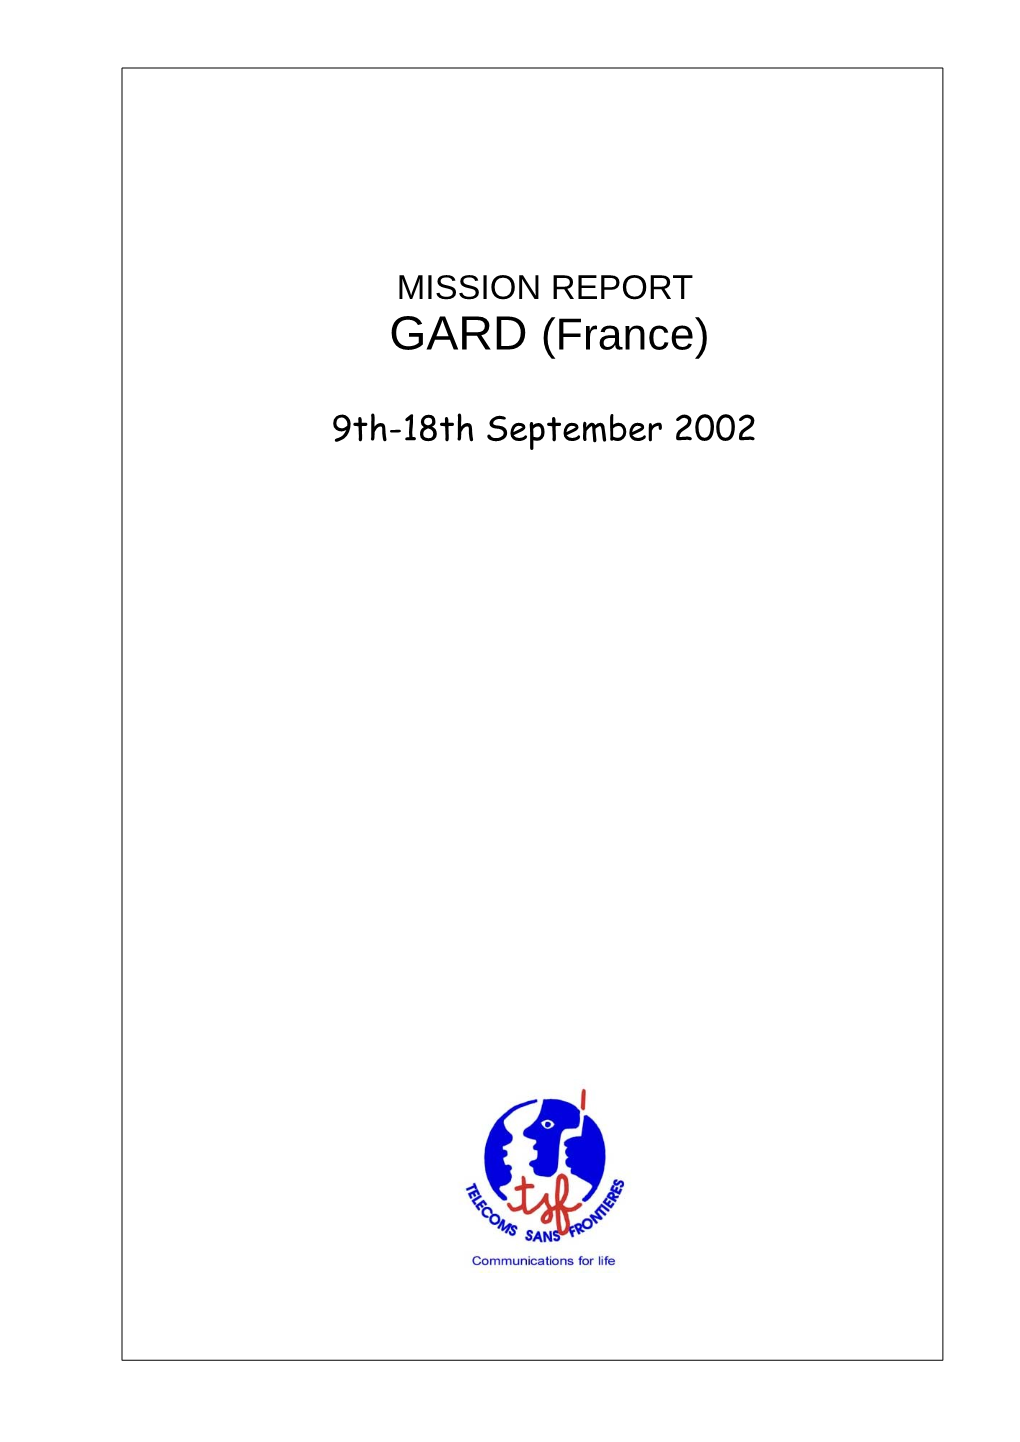 Read the Mission Report